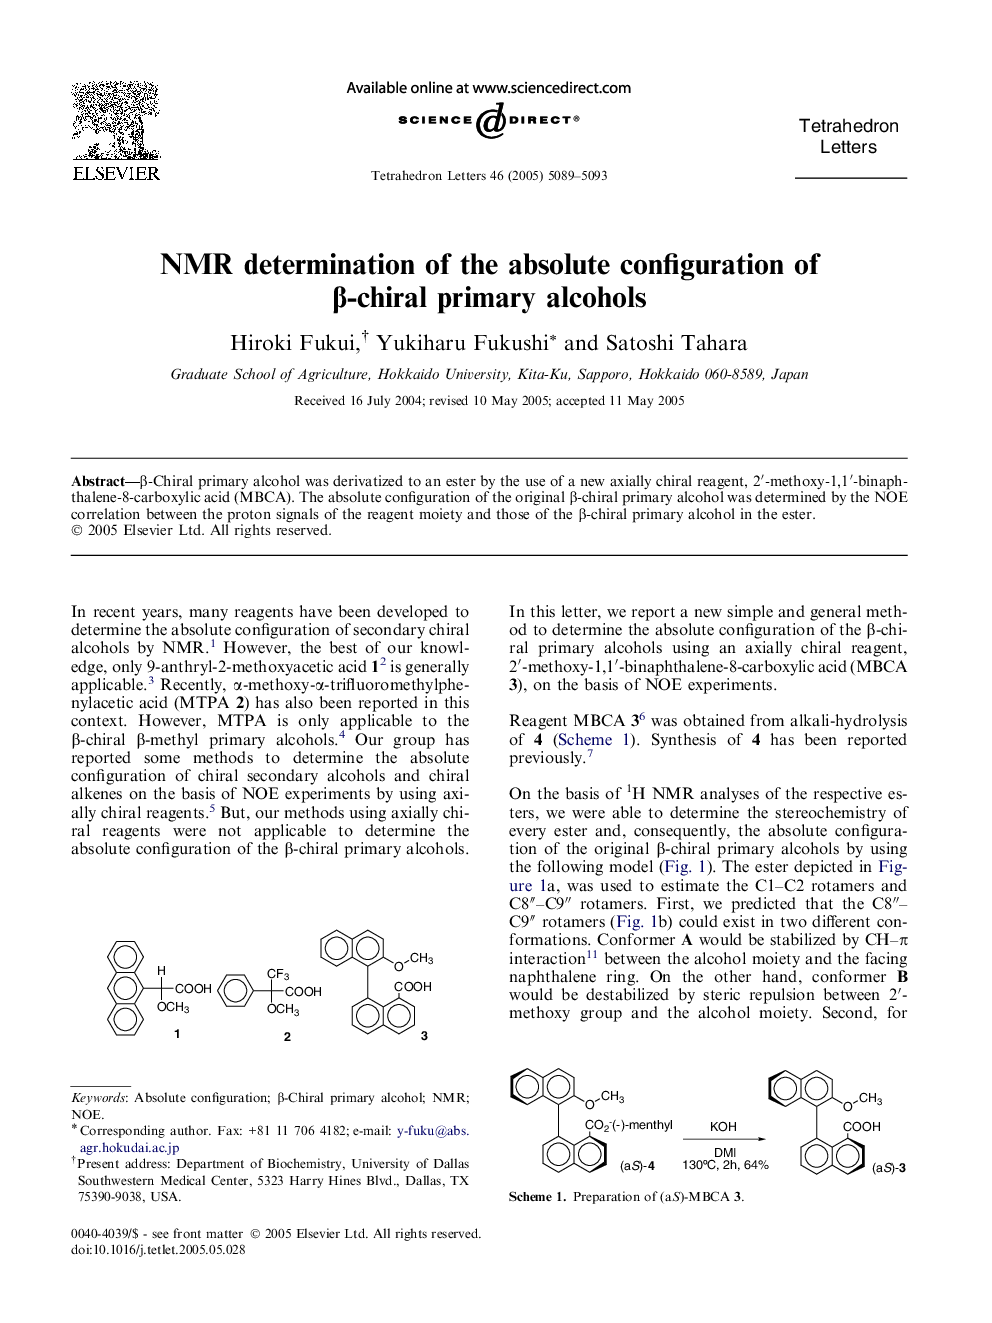 NMR determination of the absolute configuration of Î²-chiral primary alcohols